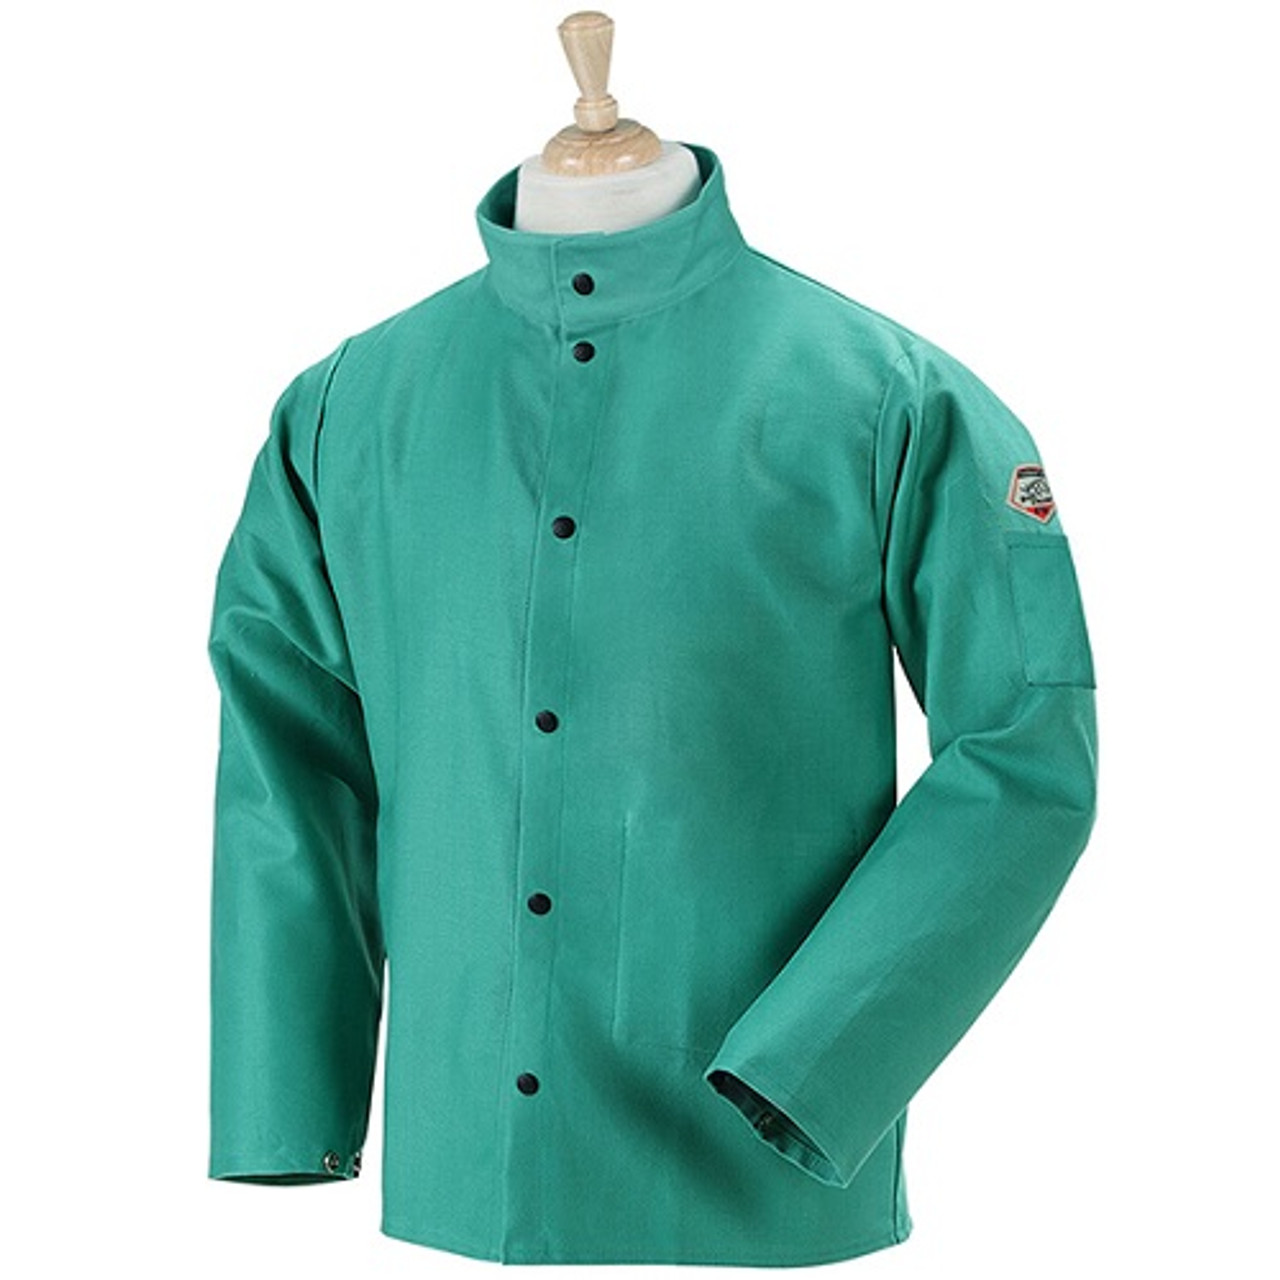 With its traditional look and fit, our classic 9 oz. FR cotton welding jacket offers reliable protection for light welding applications